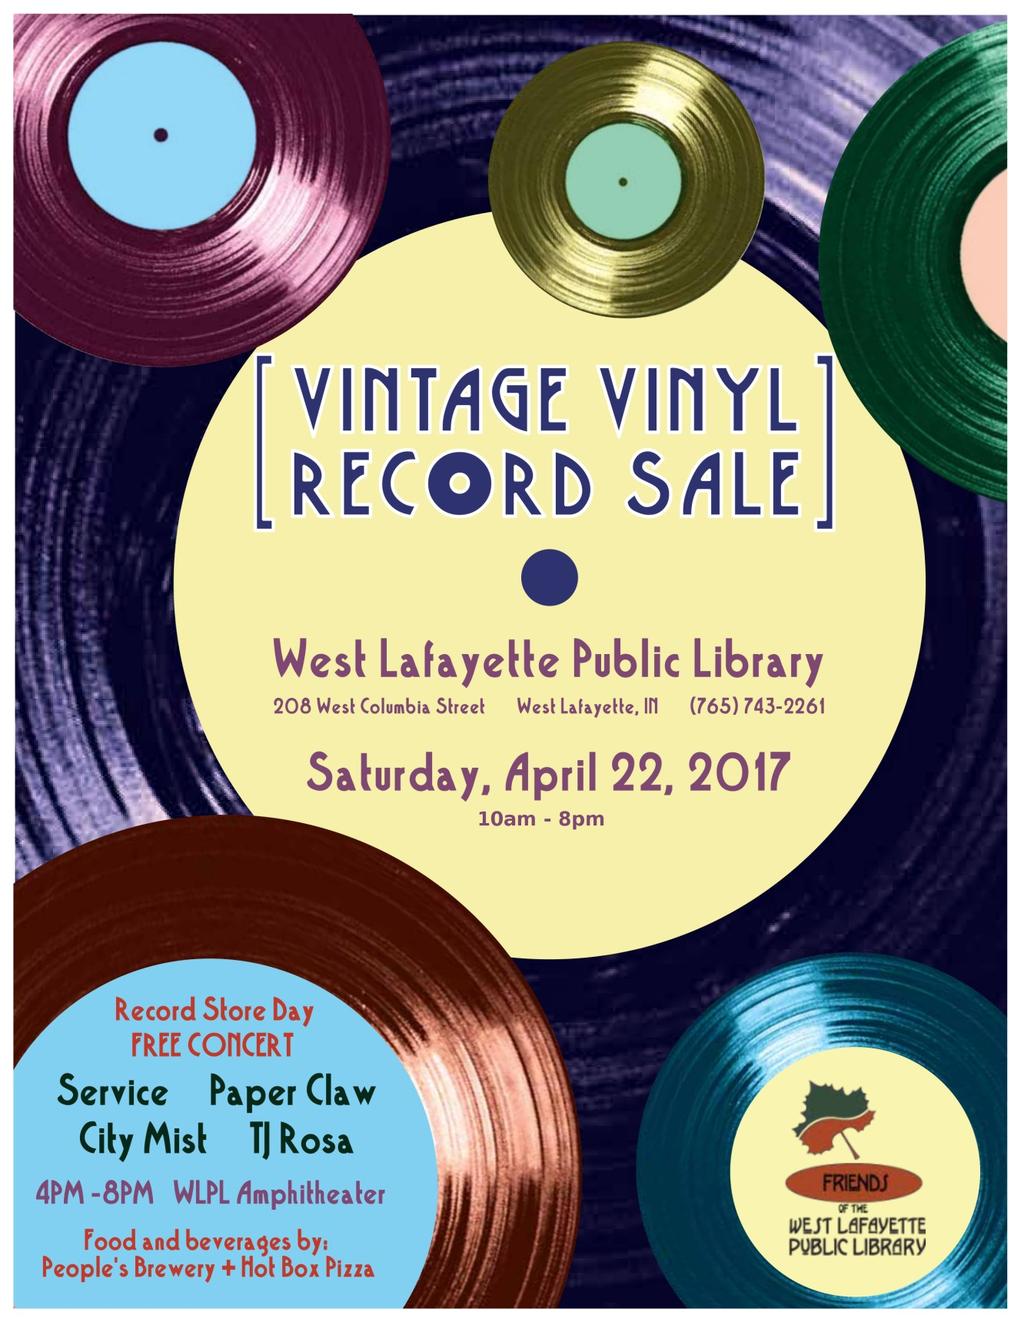 Categories will include Rock, Folk, Classical, Jazz, World Music, Polka and Englebert Humperdinck to name just a few. Records generally run $0.50 to $3.